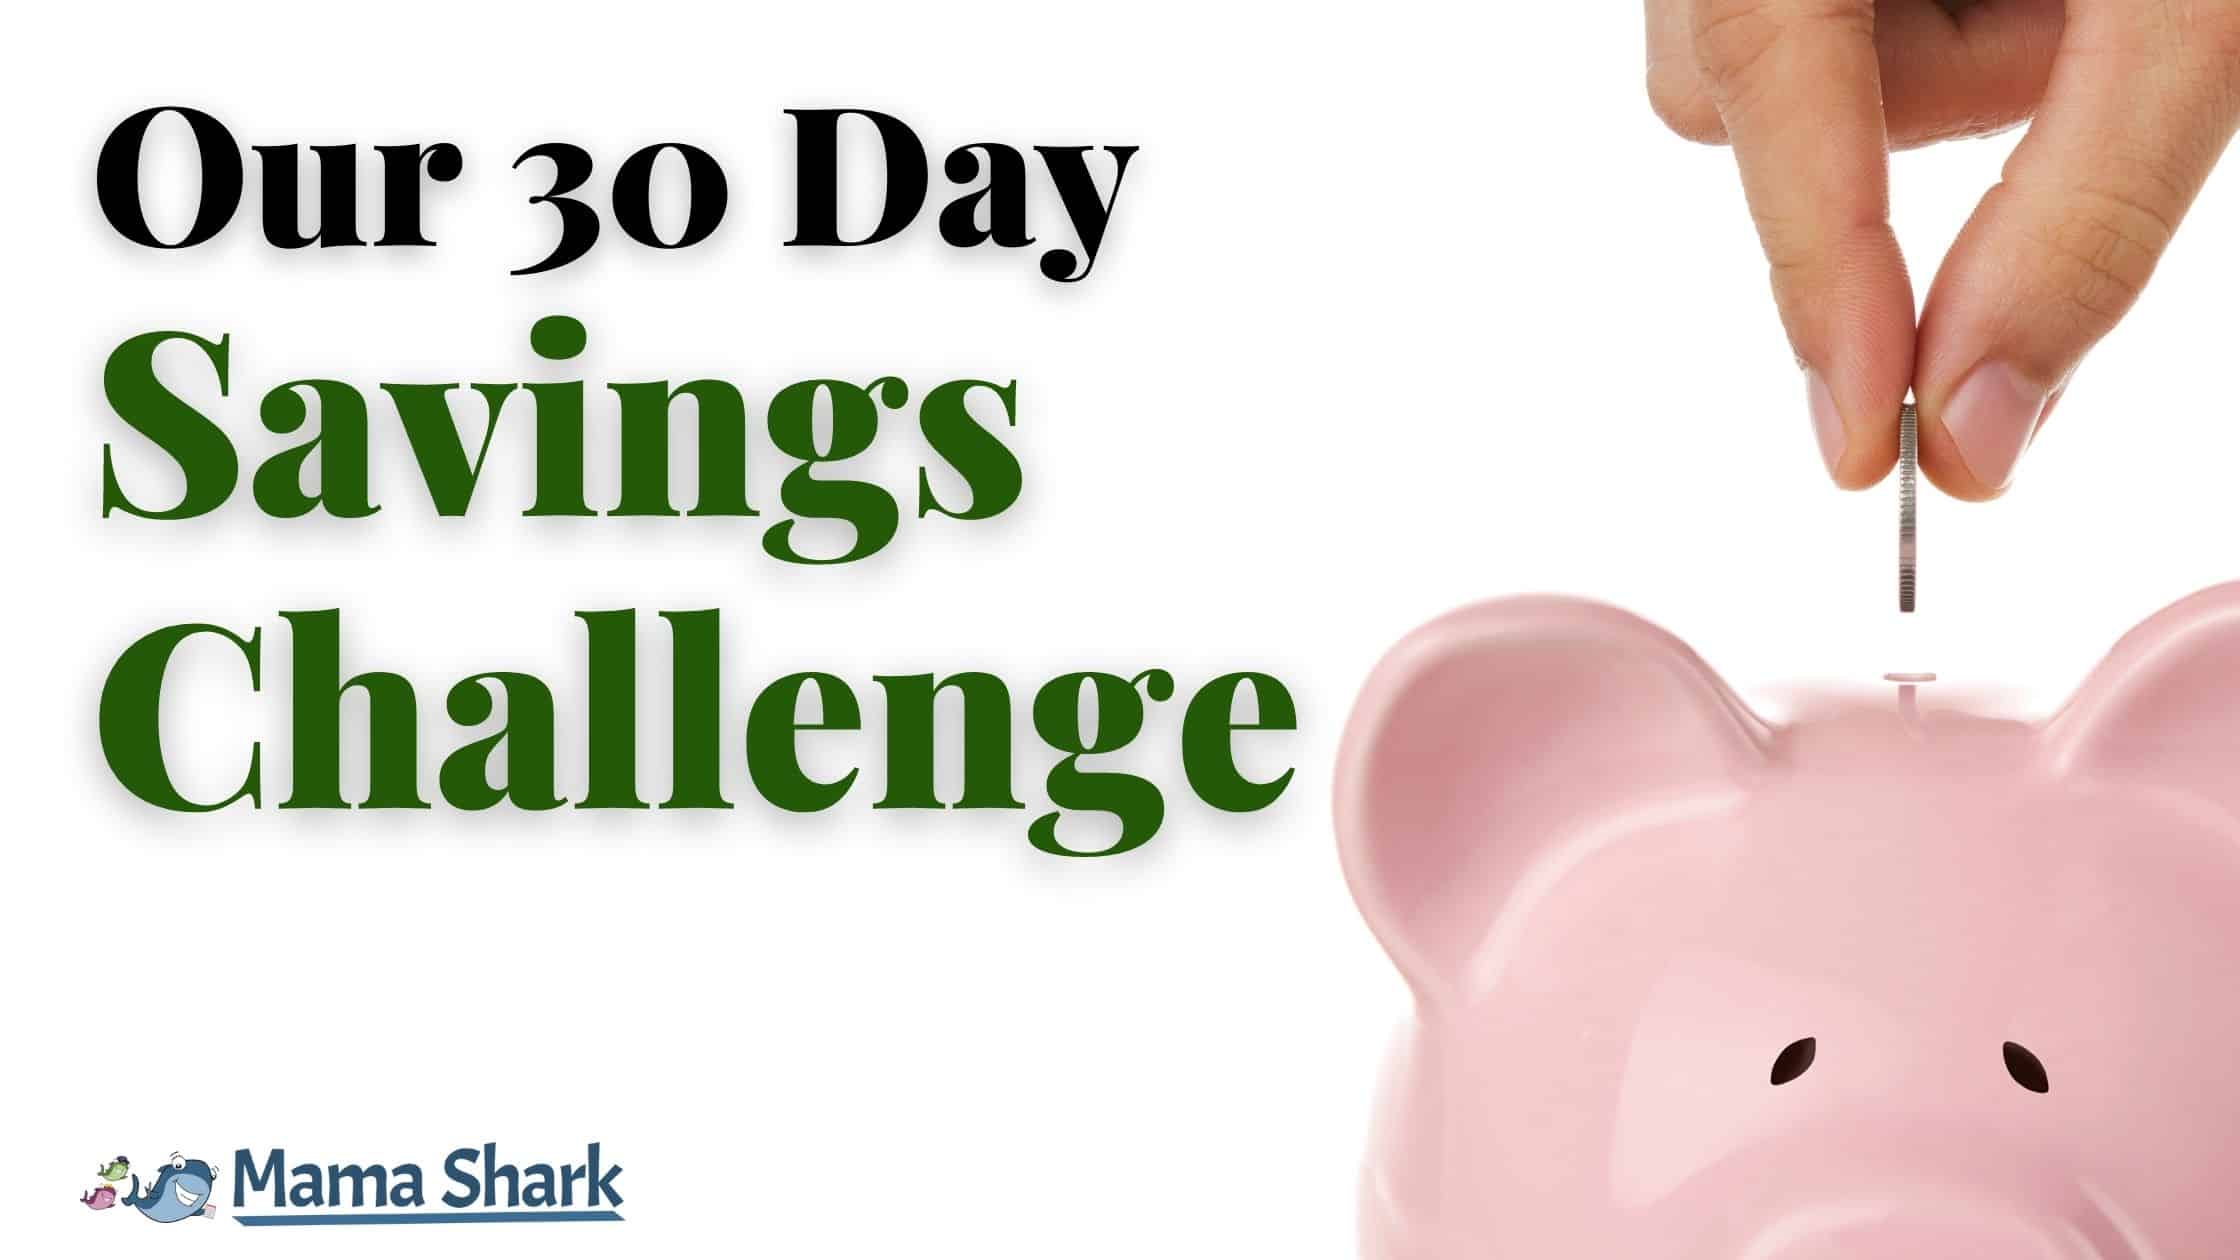 Save More Money with this 30 Day Money Saving Challenge!